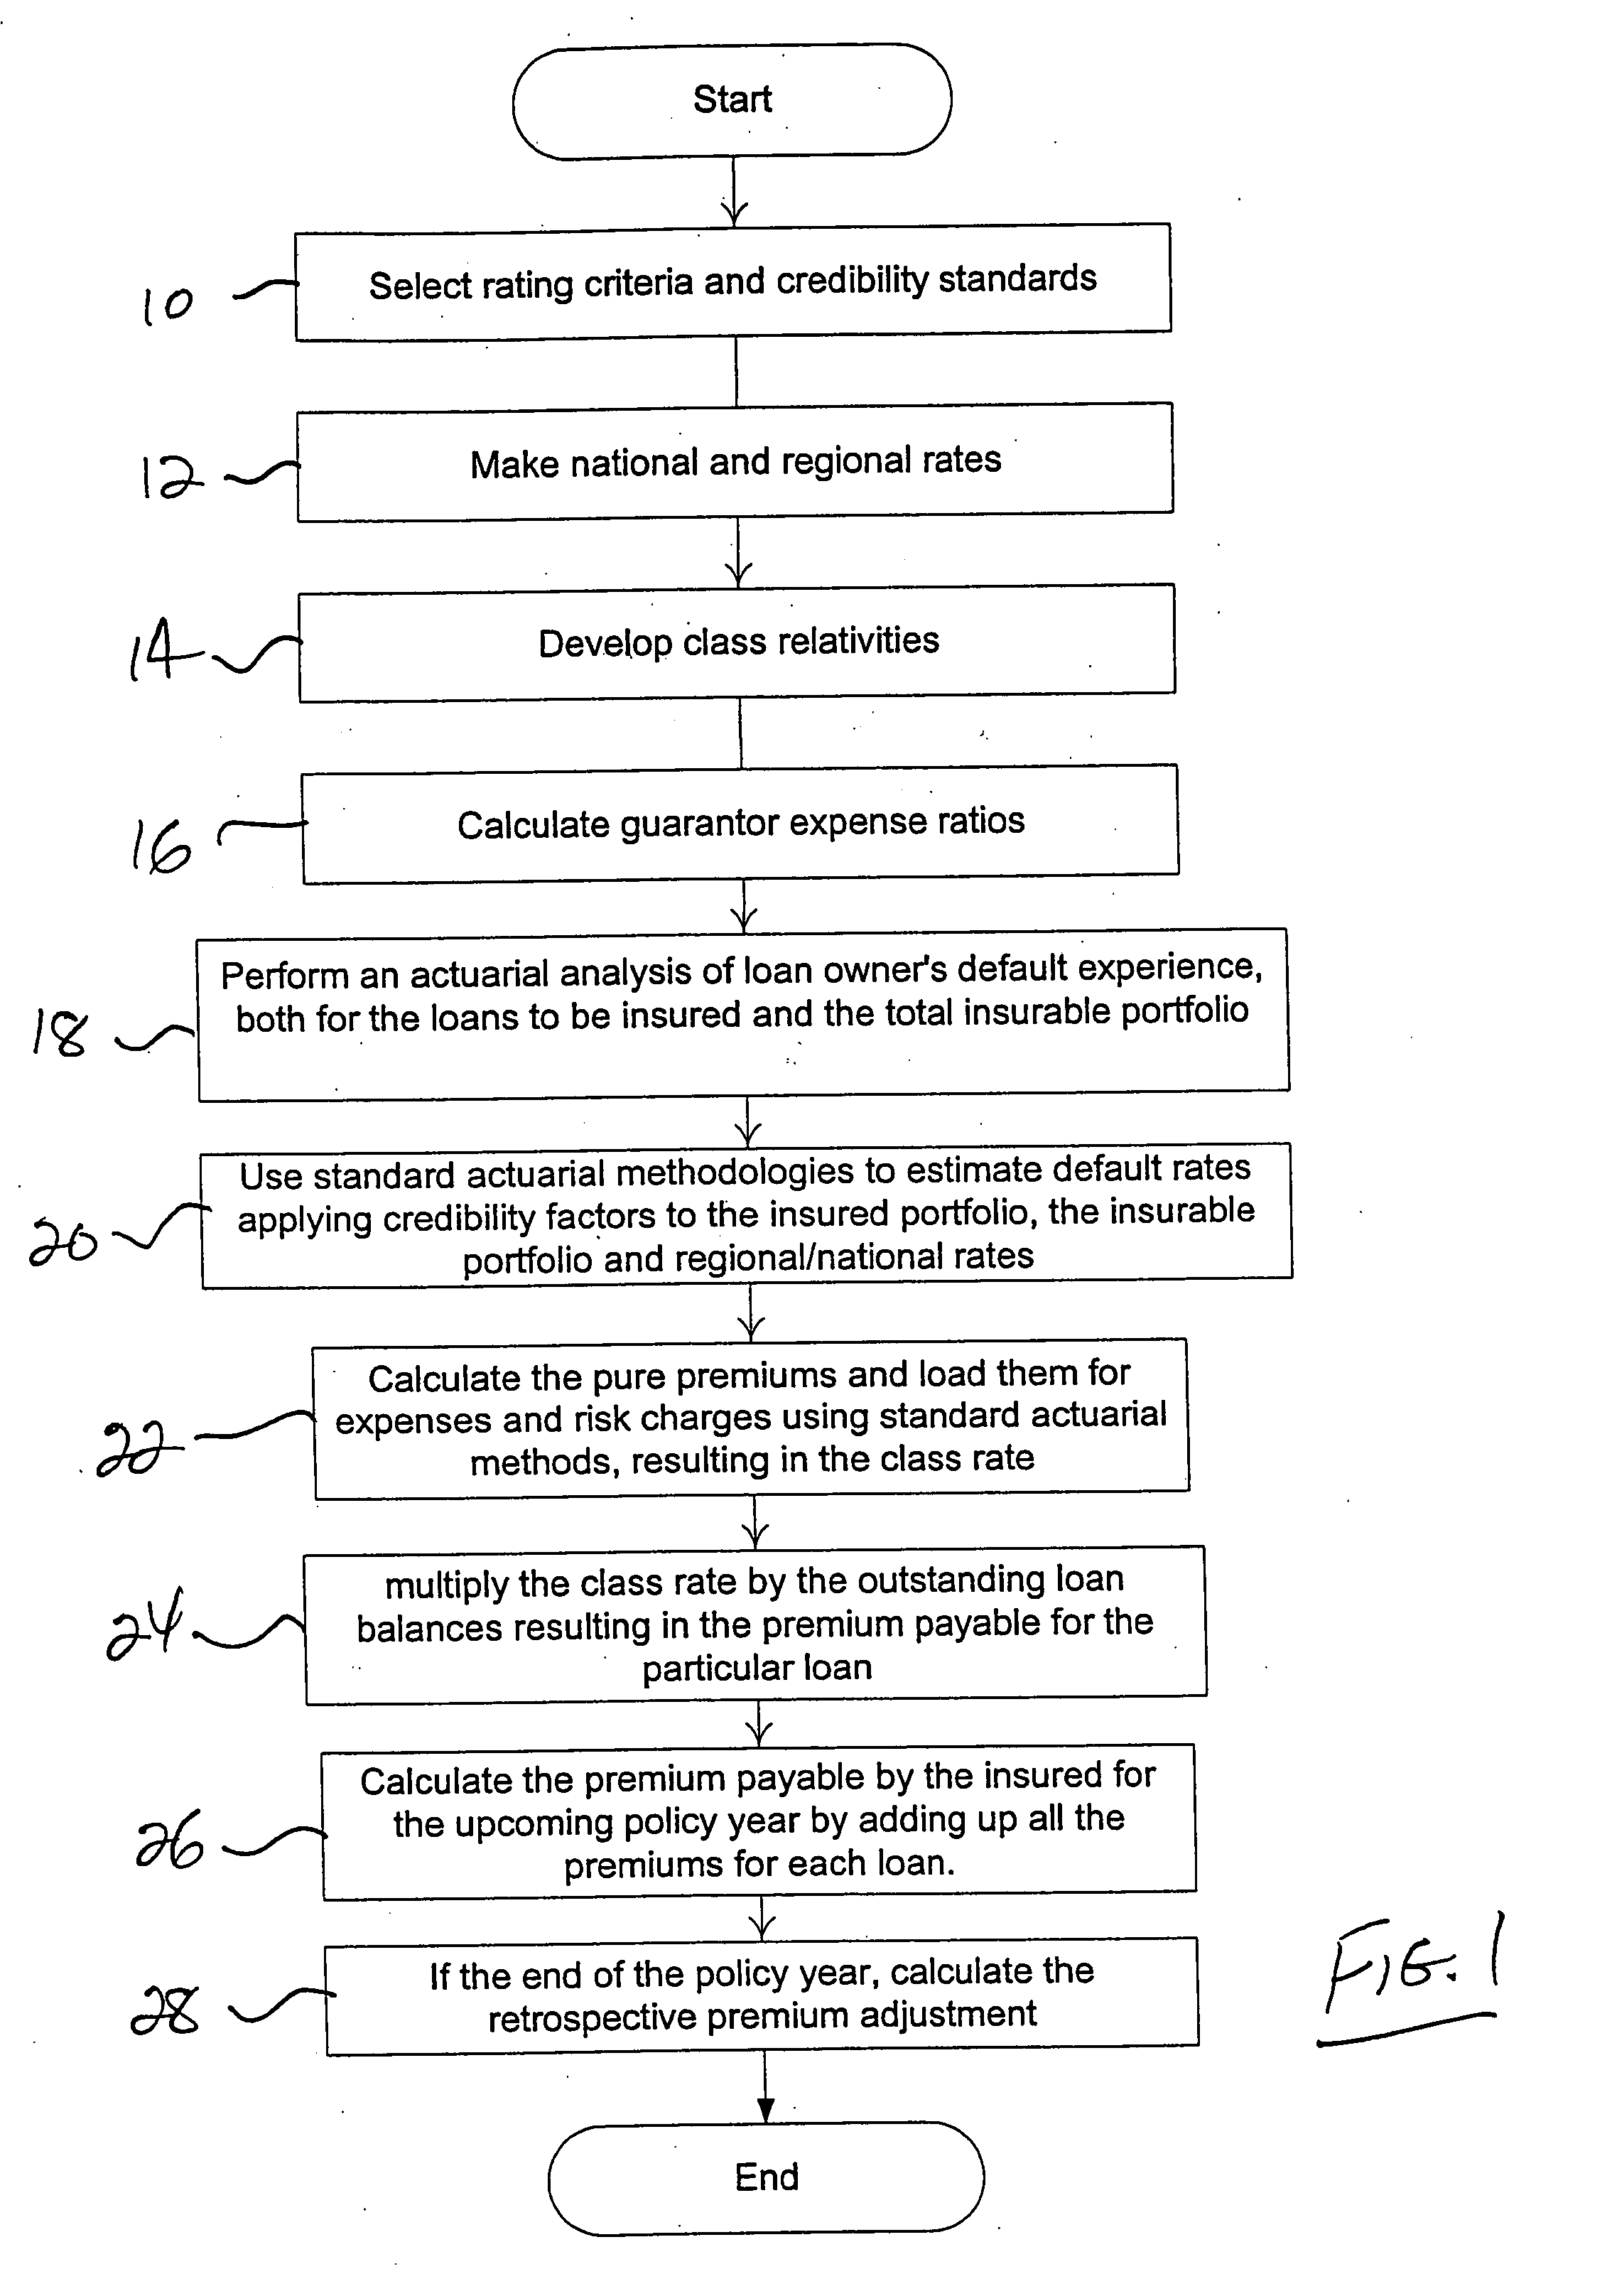 System and method for managing renewable repriced mortgage guaranty insurance